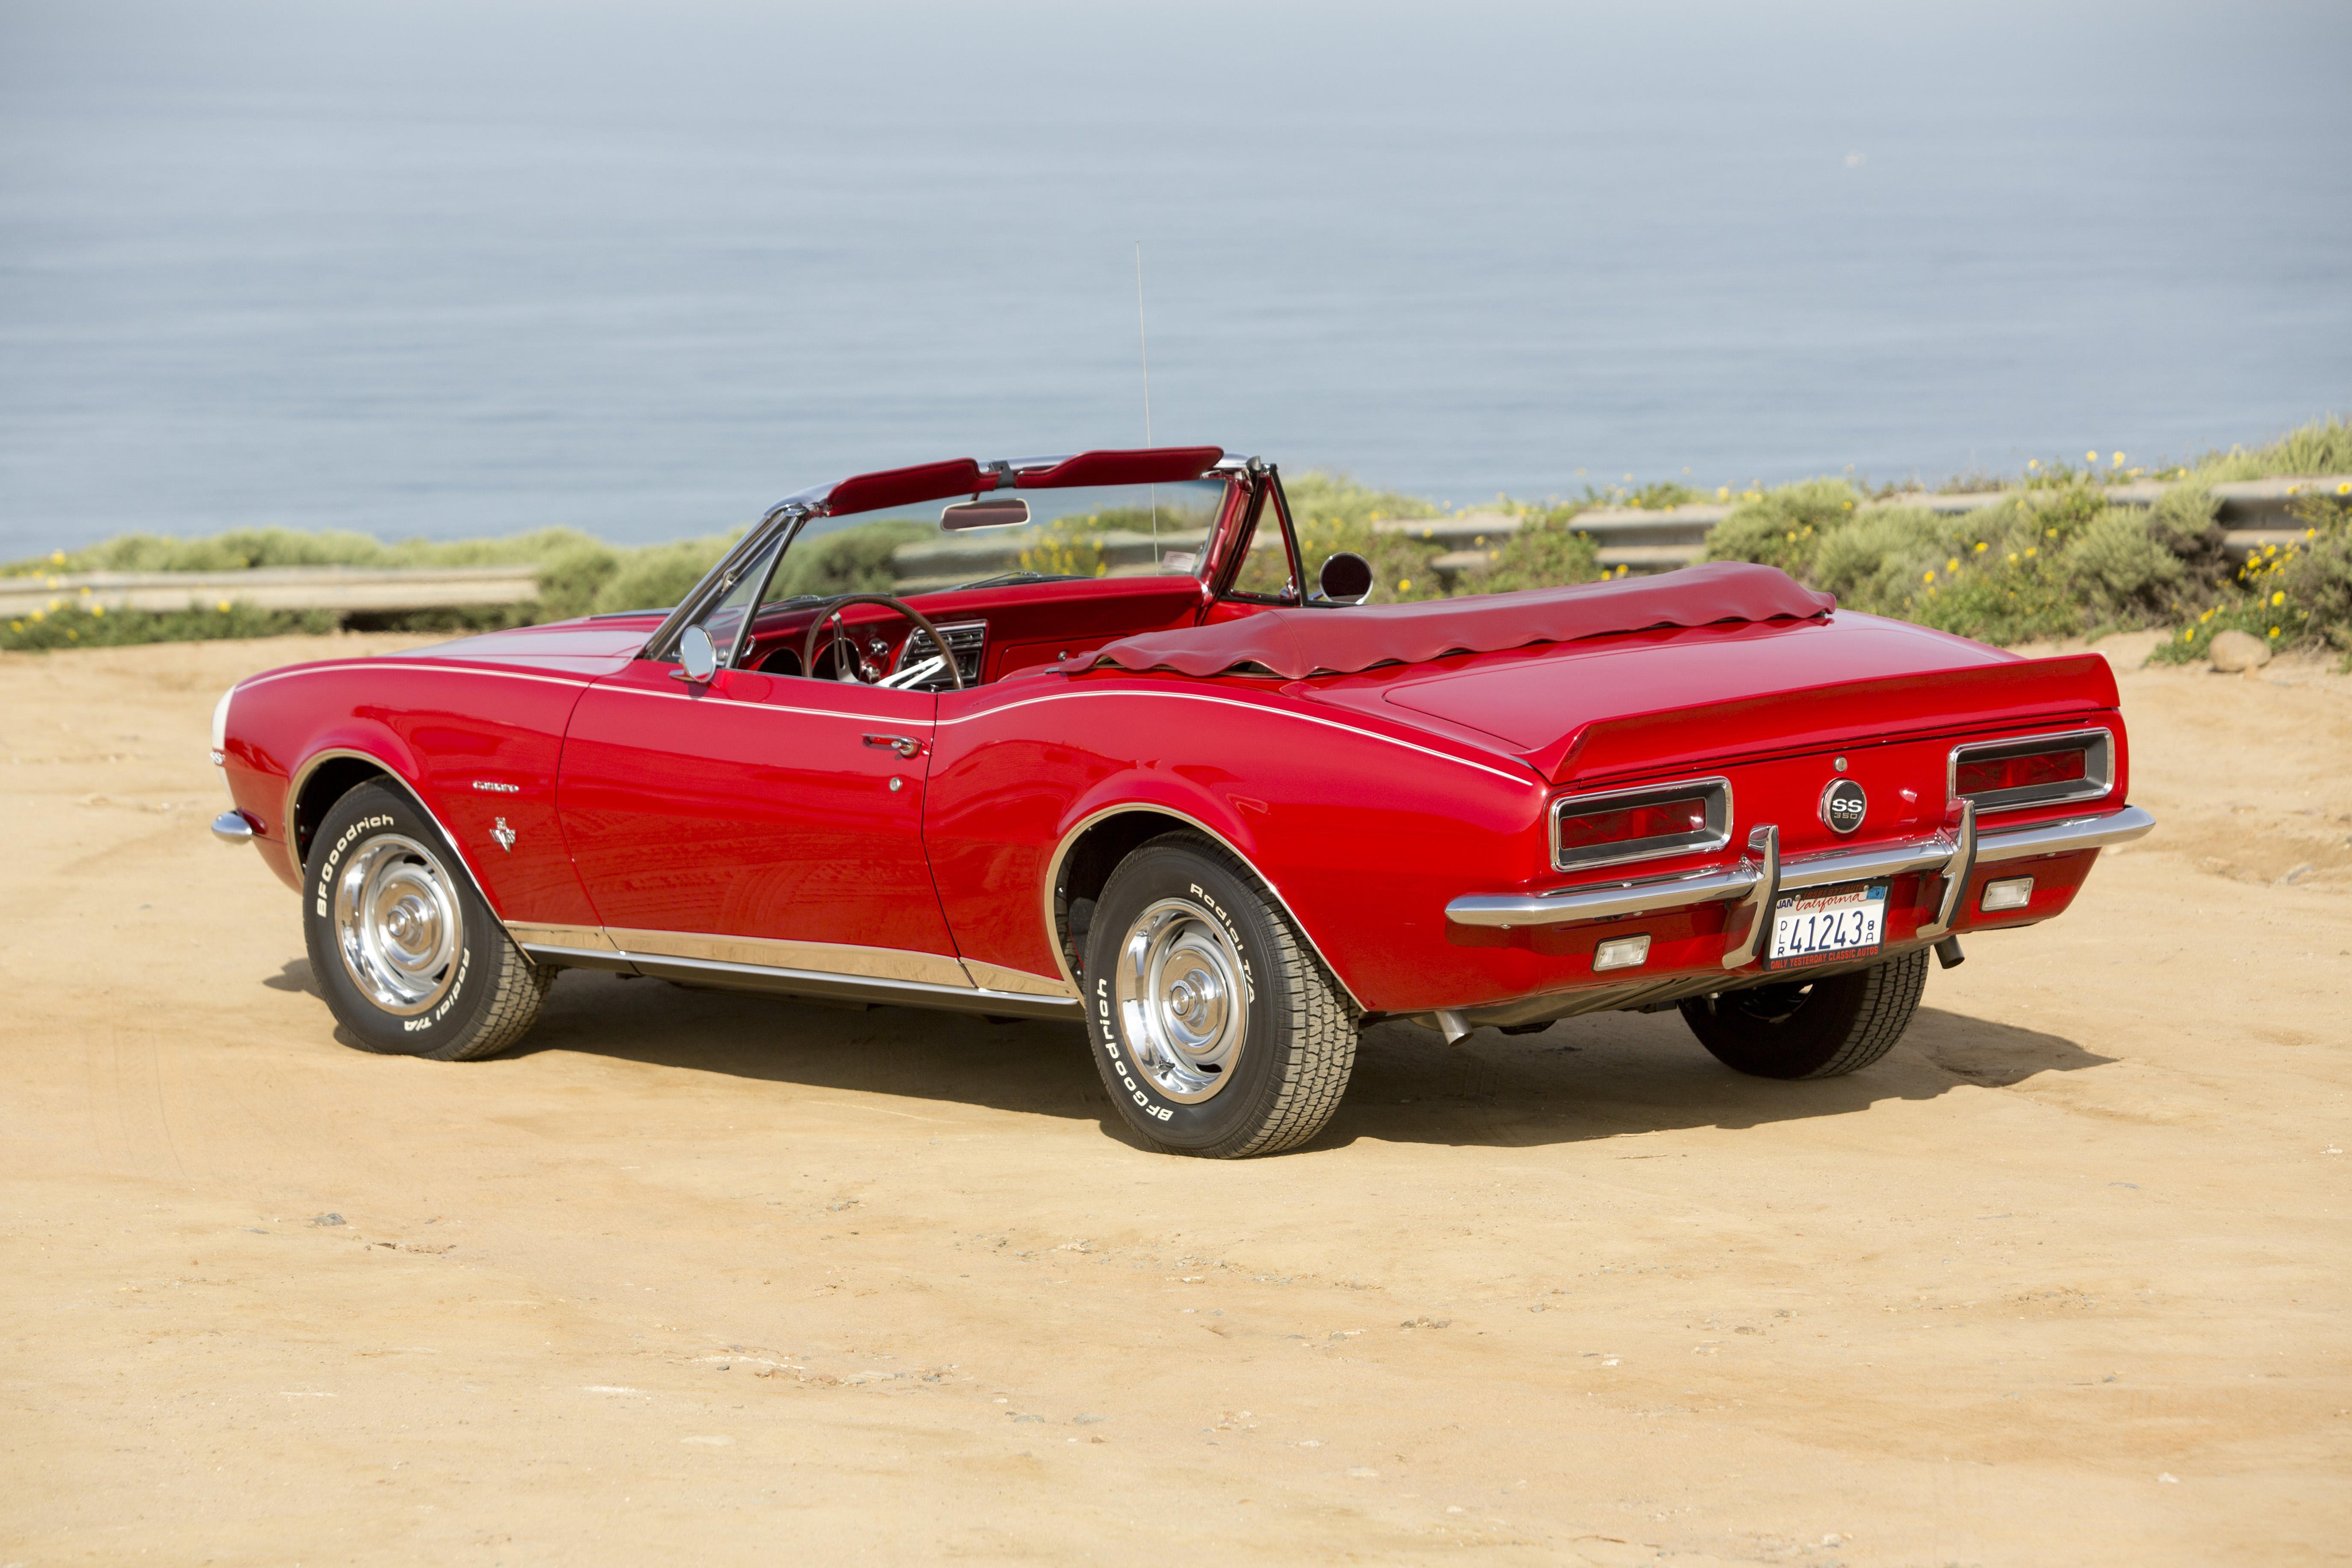 1967, Chevrolet, Camaro, R s, S s, 350, Convertible, 12467, Muscle, Classic Wallpaper